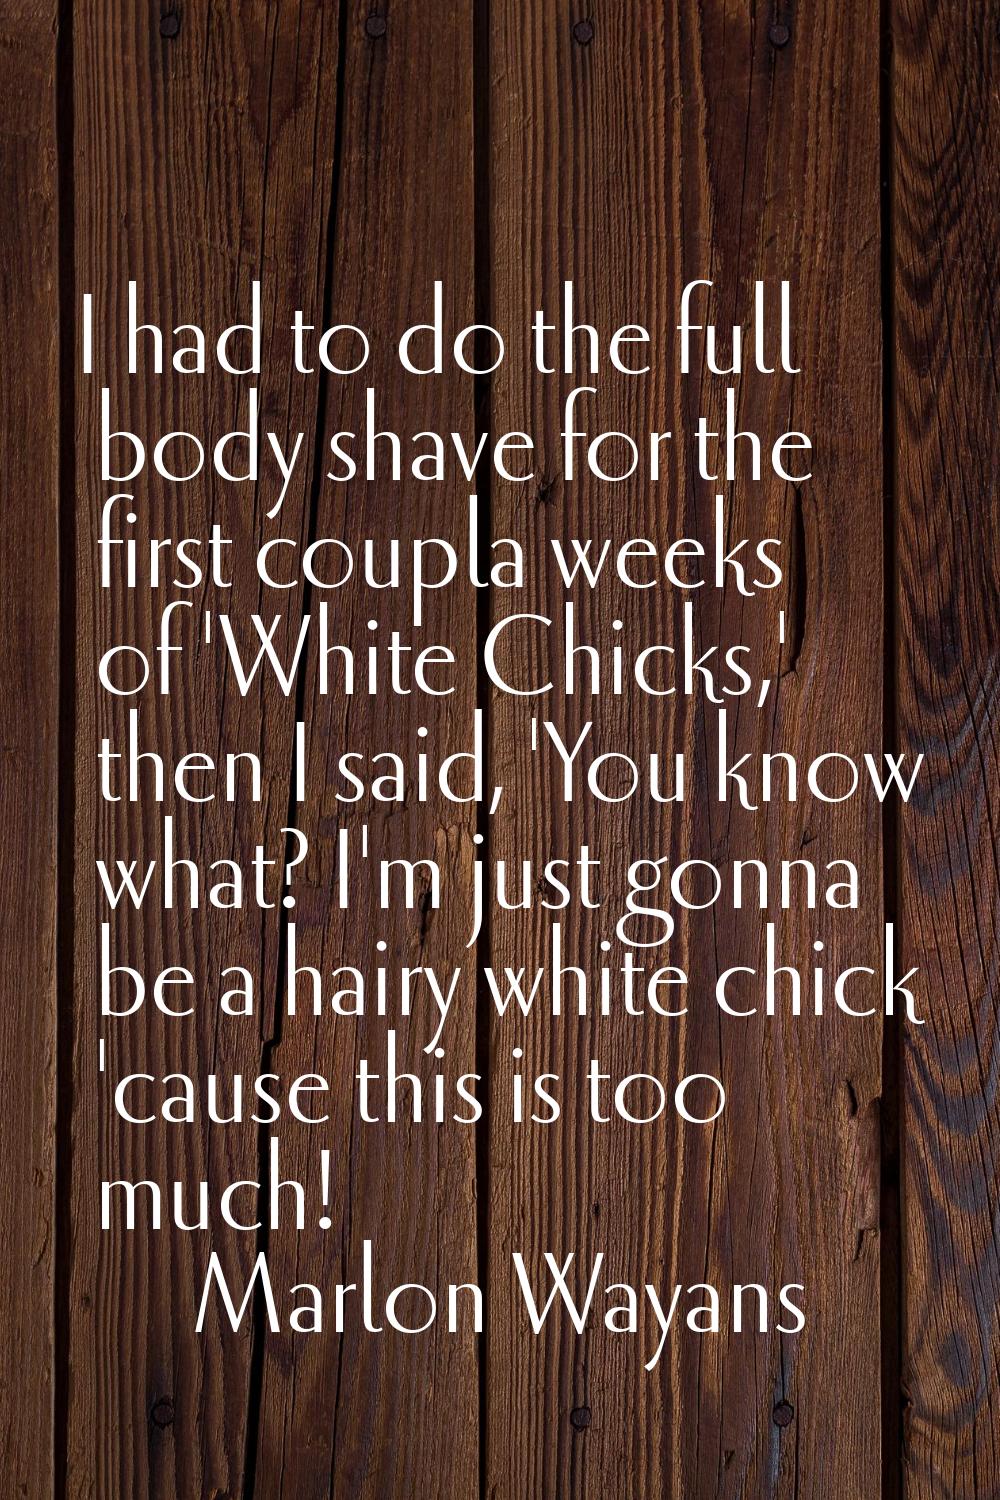 I had to do the full body shave for the first coupla weeks of 'White Chicks,' then I said, 'You kno